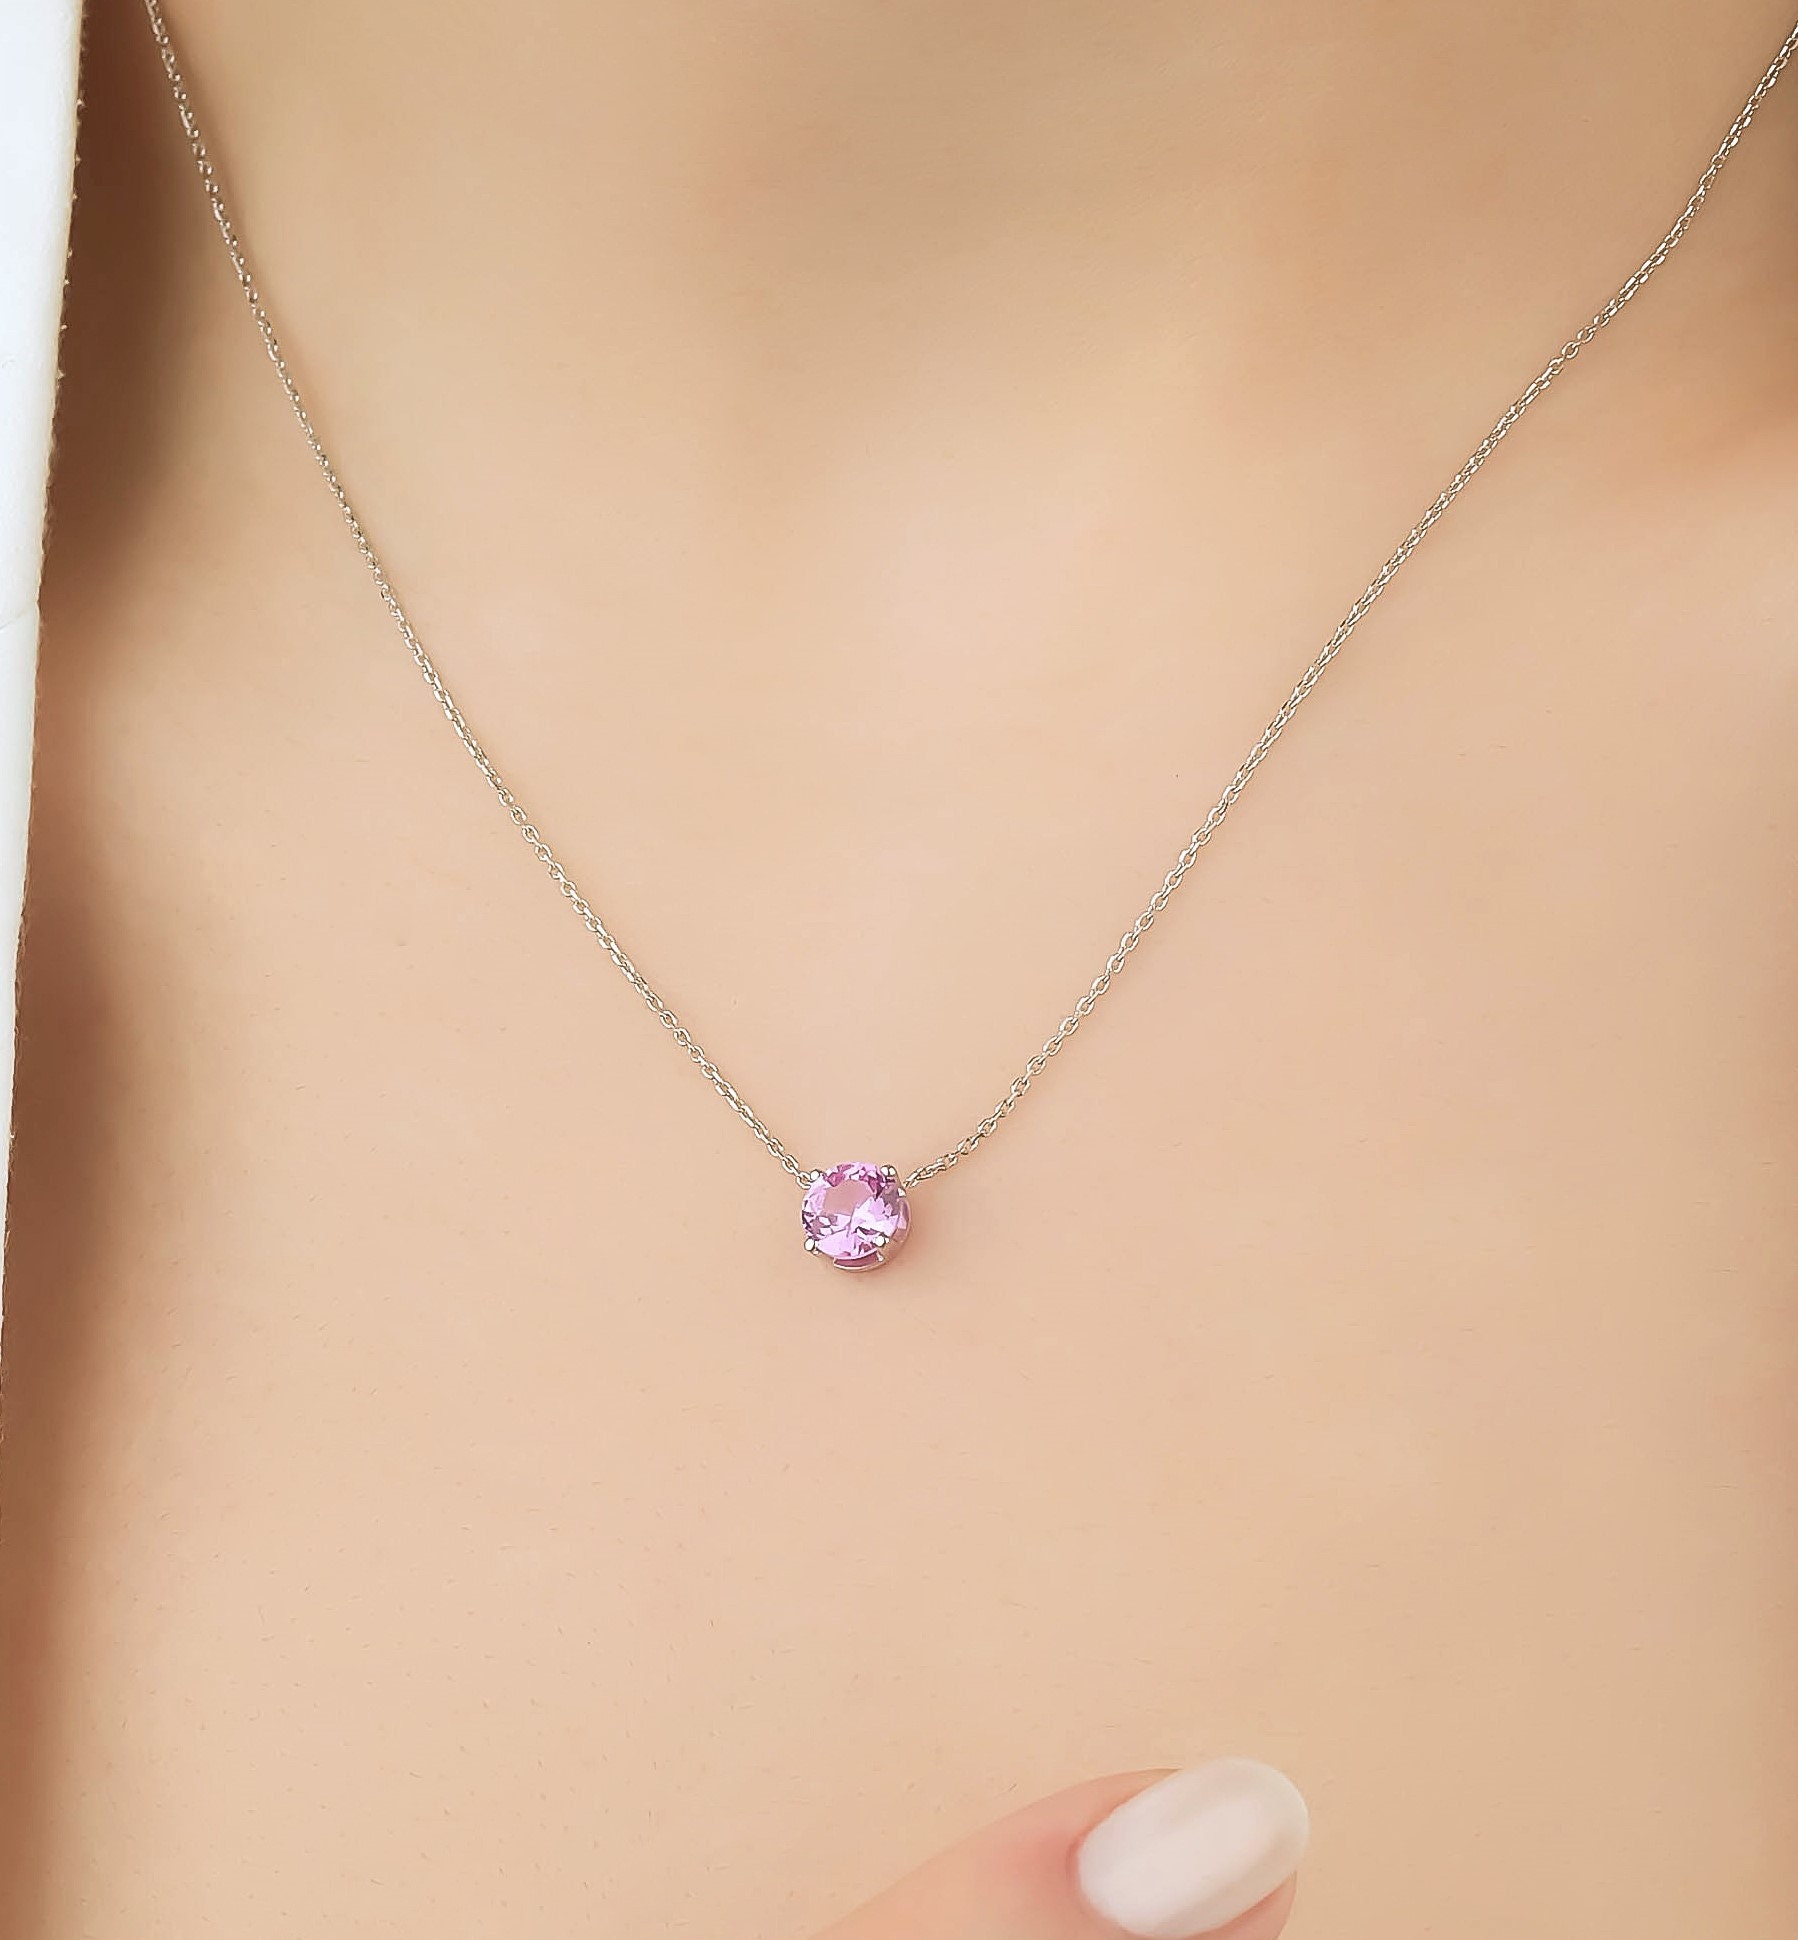 Buy 14K Solid White Gold Pink Sapphire Necklace 6mm Prong Setting Online in  India 